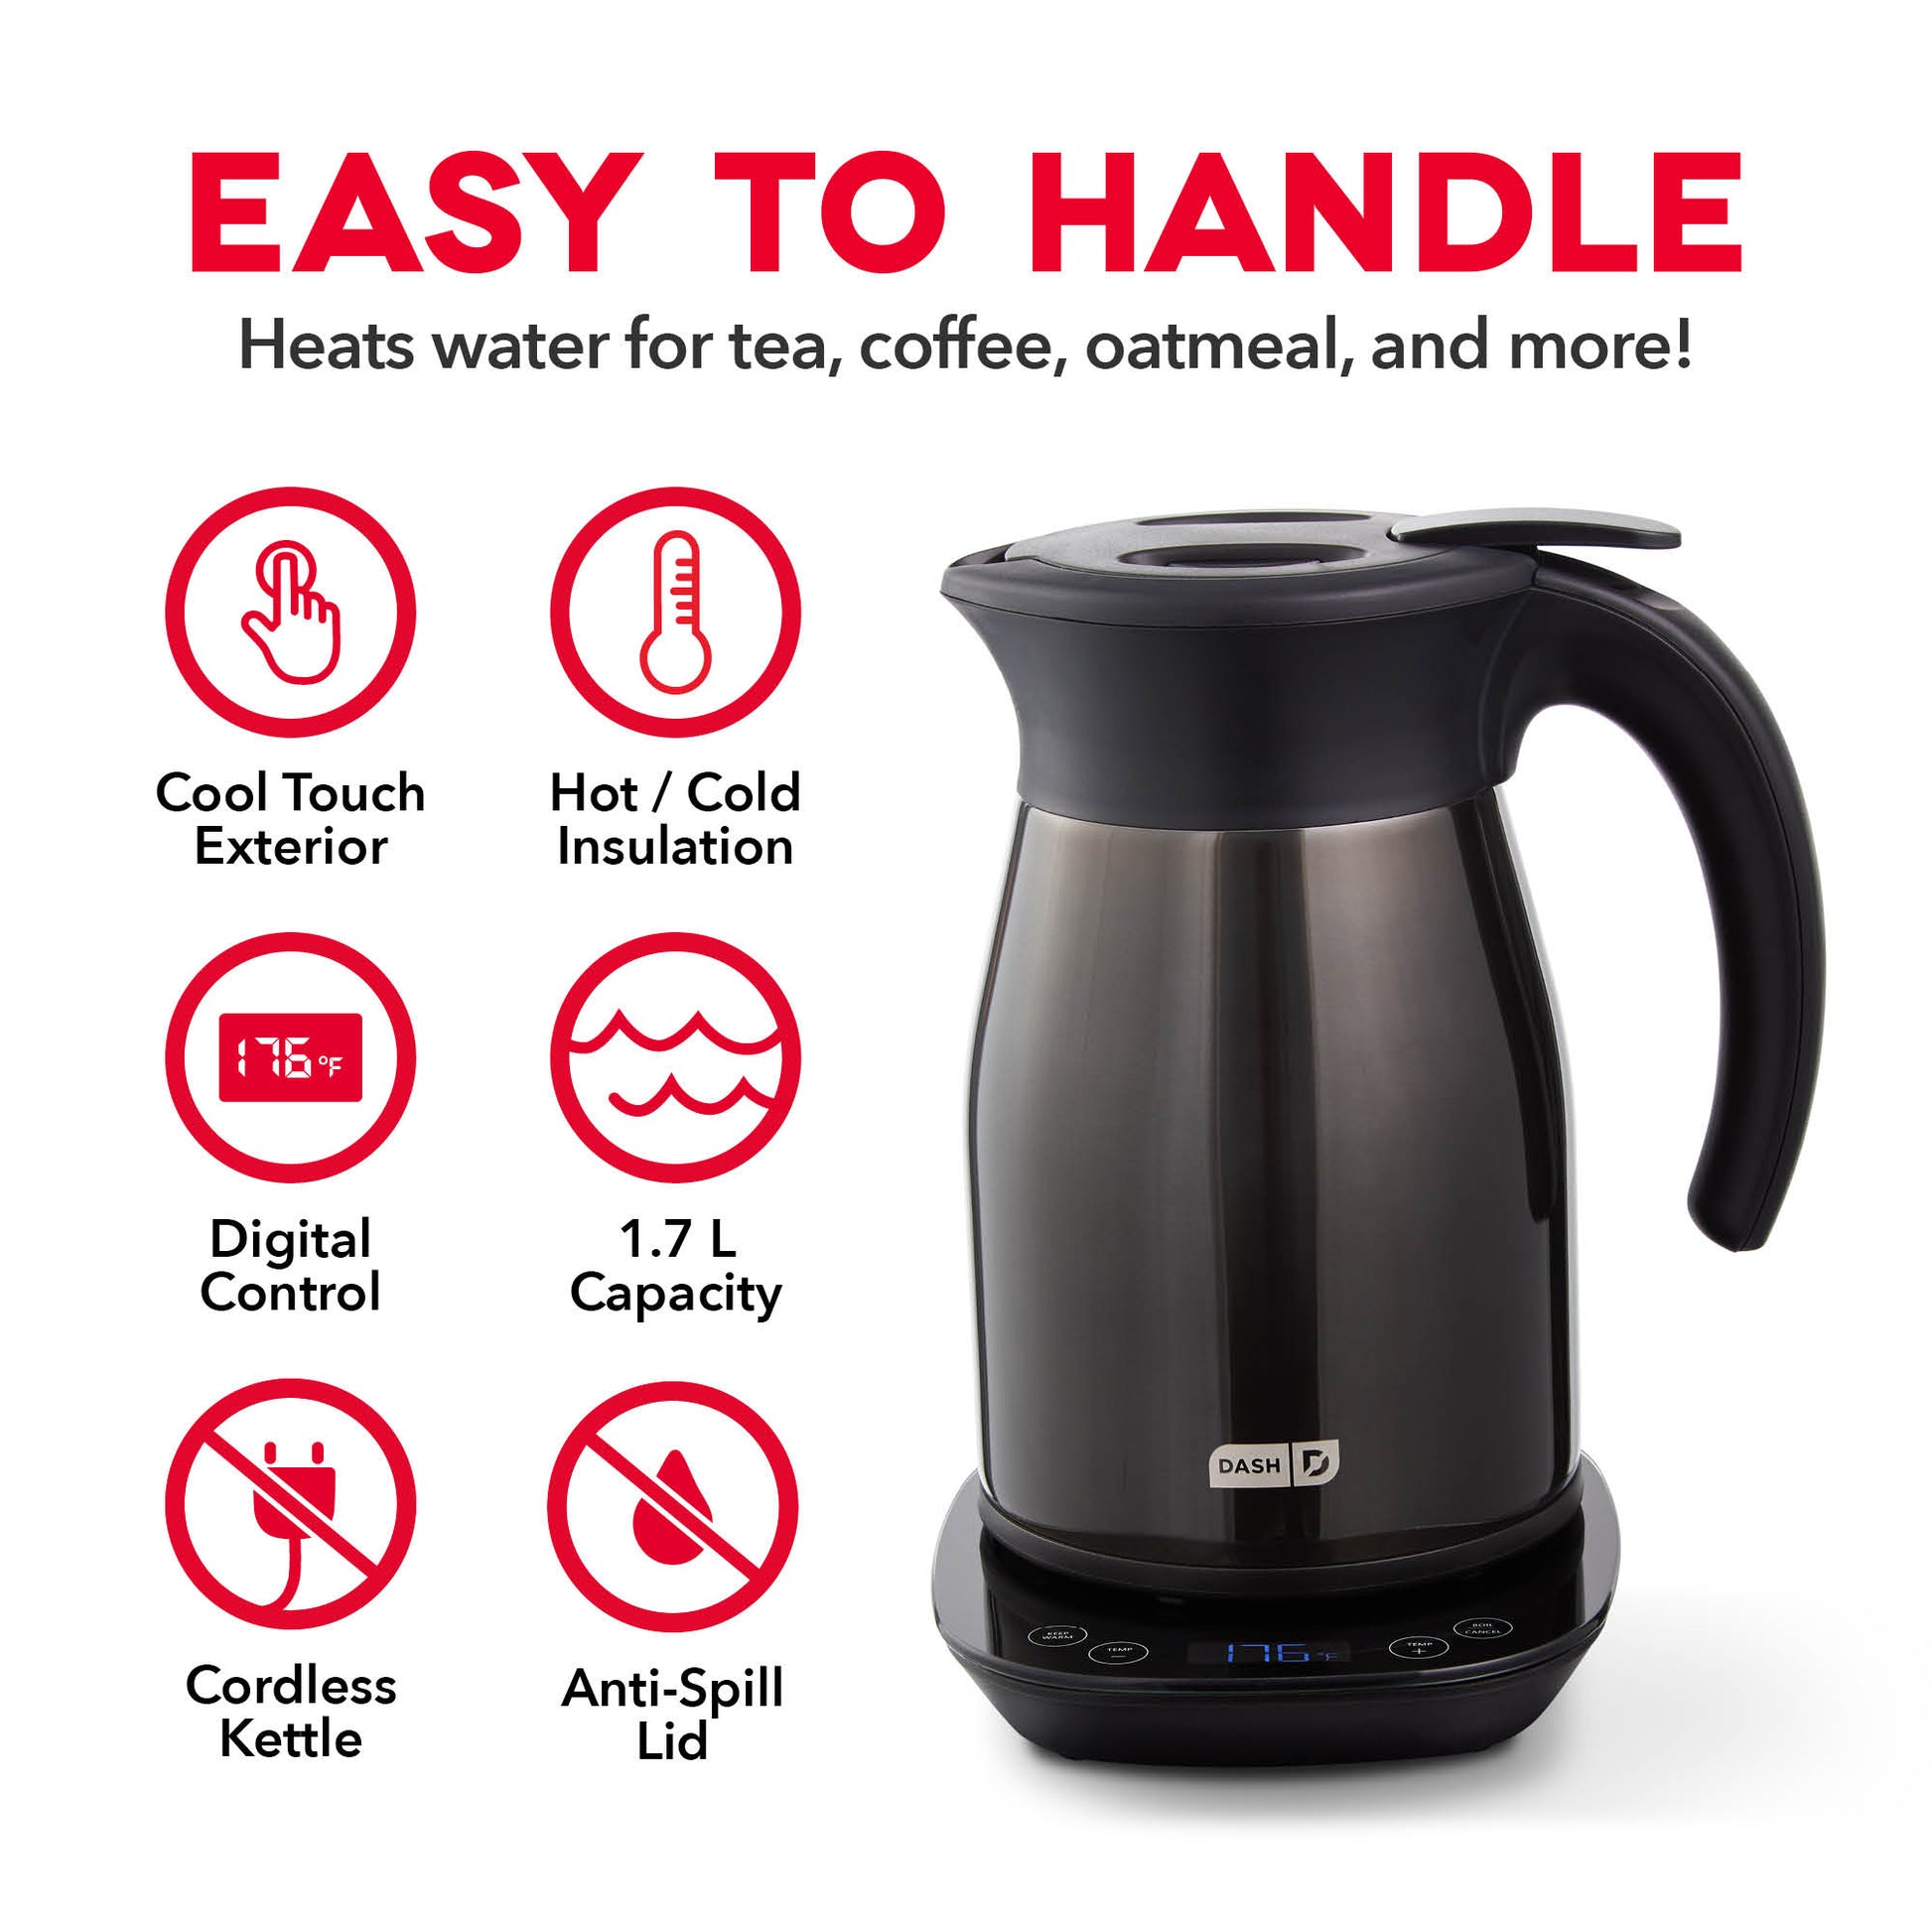 Insulated Power-Saving Kettles : thermally insulated kettle